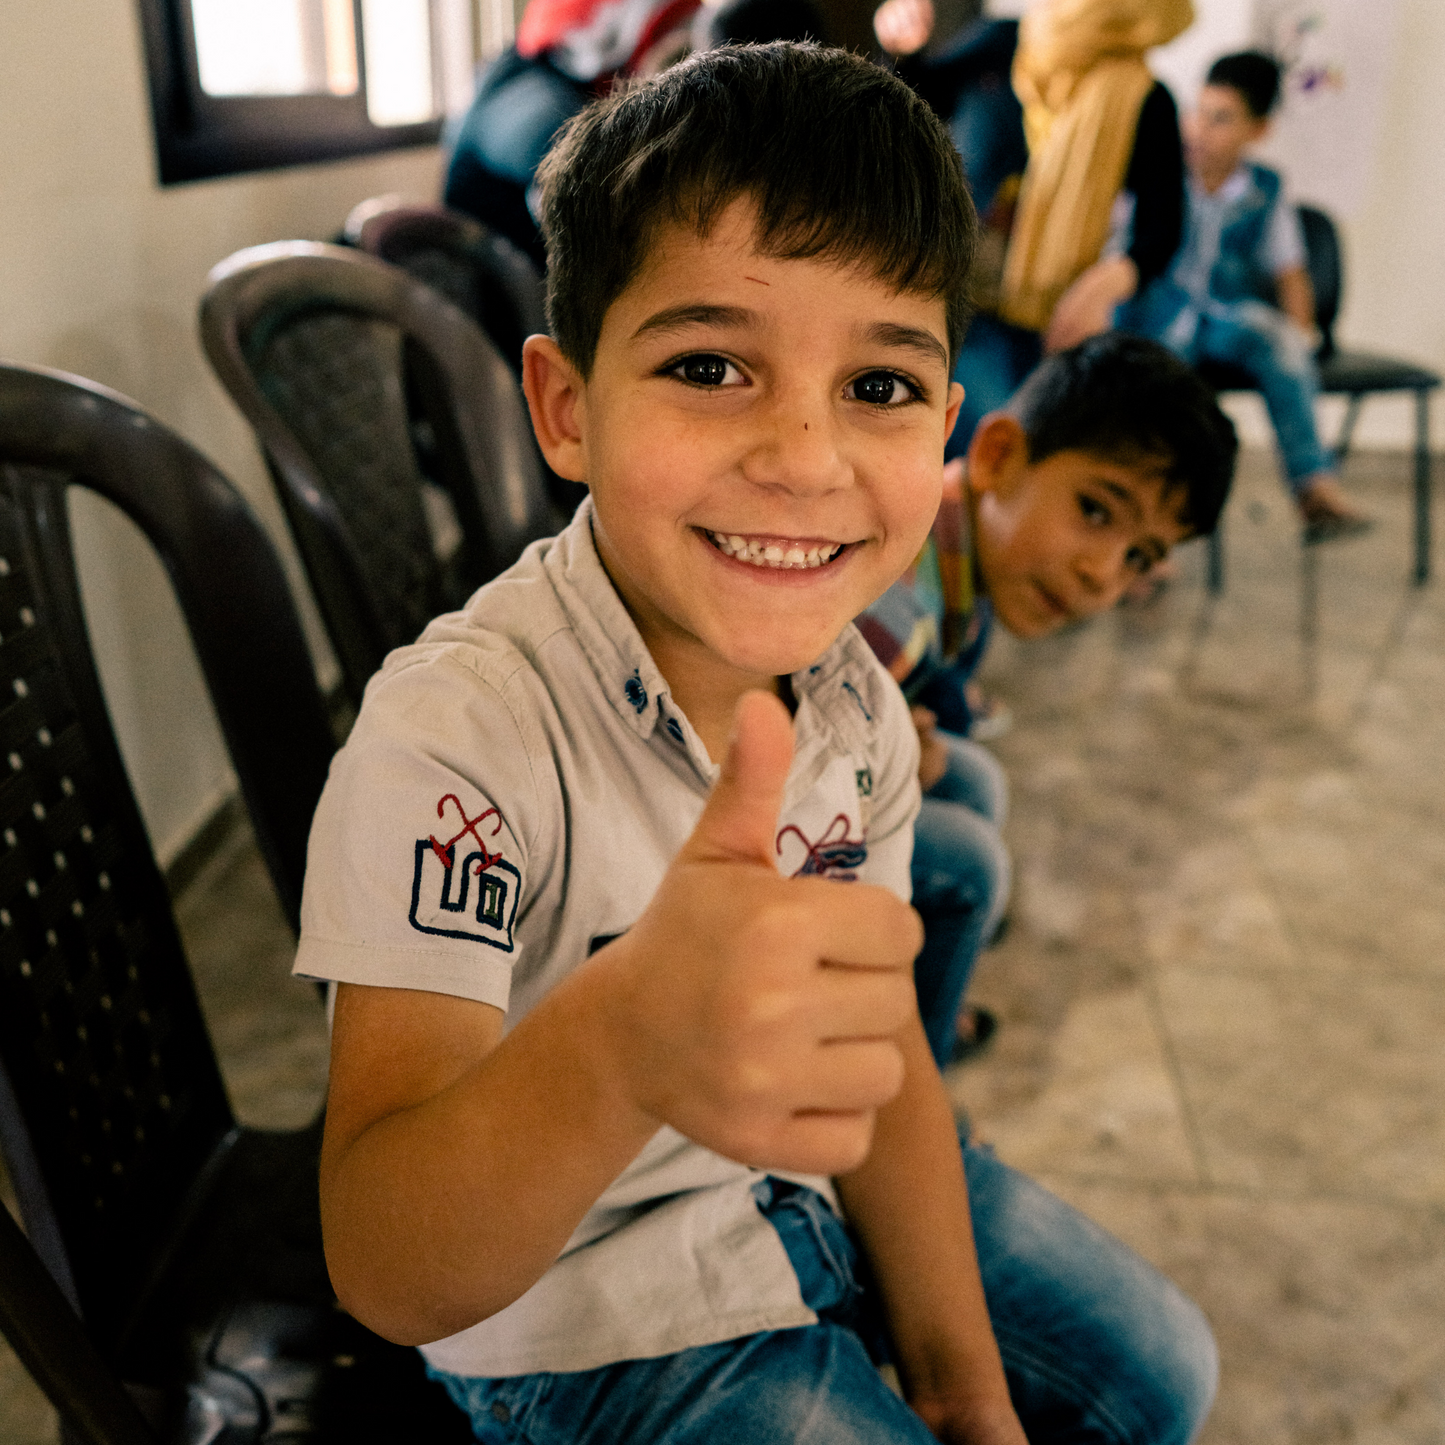 This is an image taken in a room with children refugees who are sitting down on chairs and socialising, and the image has a focus on one child who is smiling and showing thumbs up.